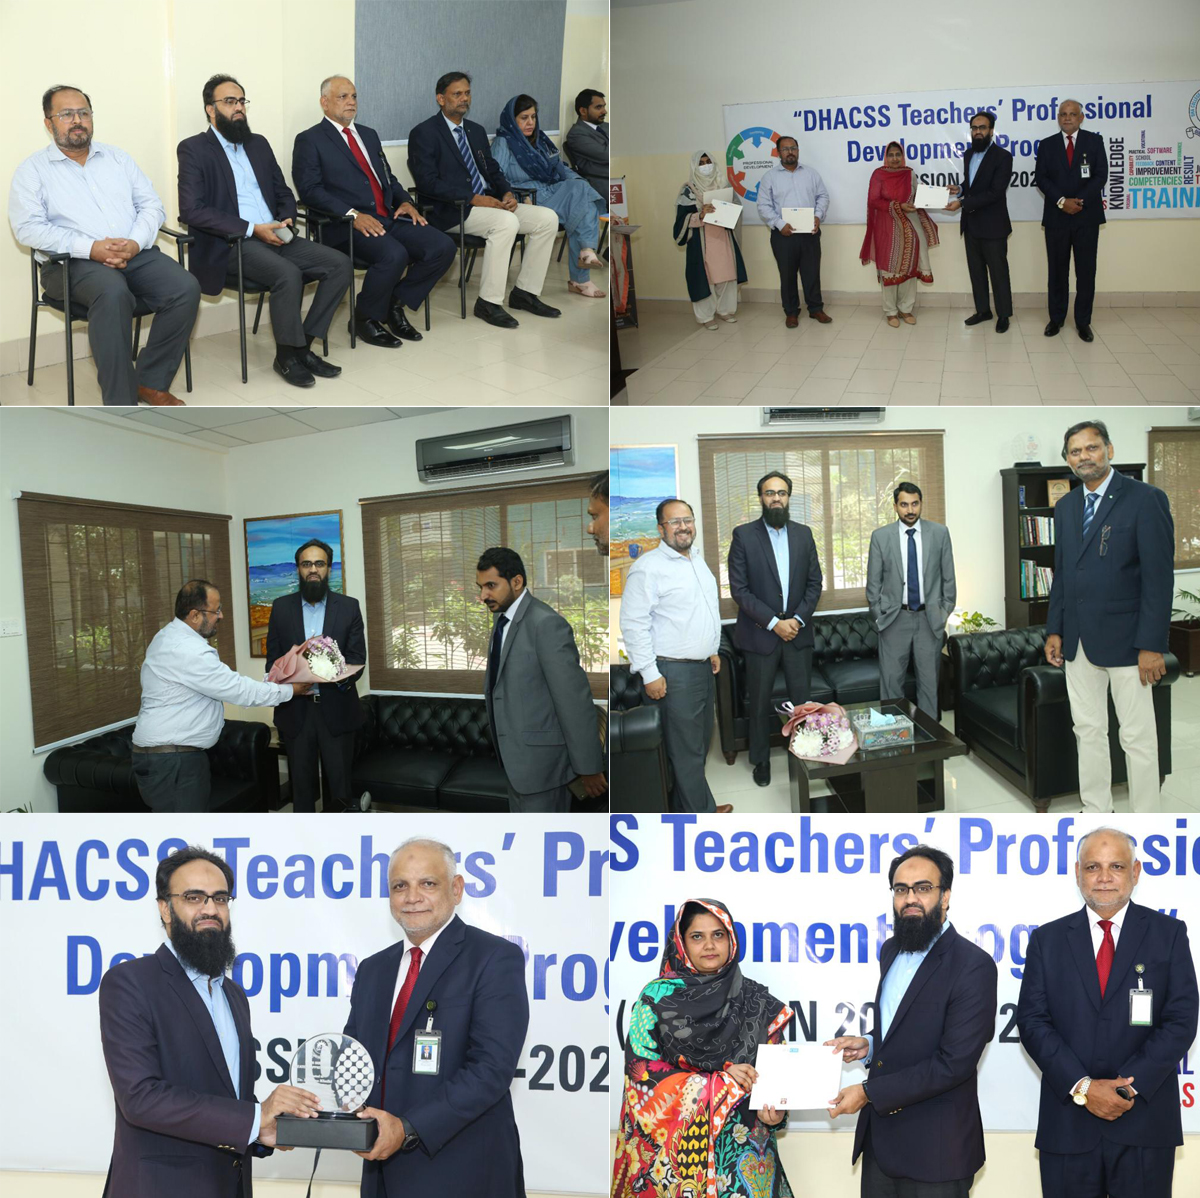 SDP at IBA Conducts Professional Development Program for DHACSS